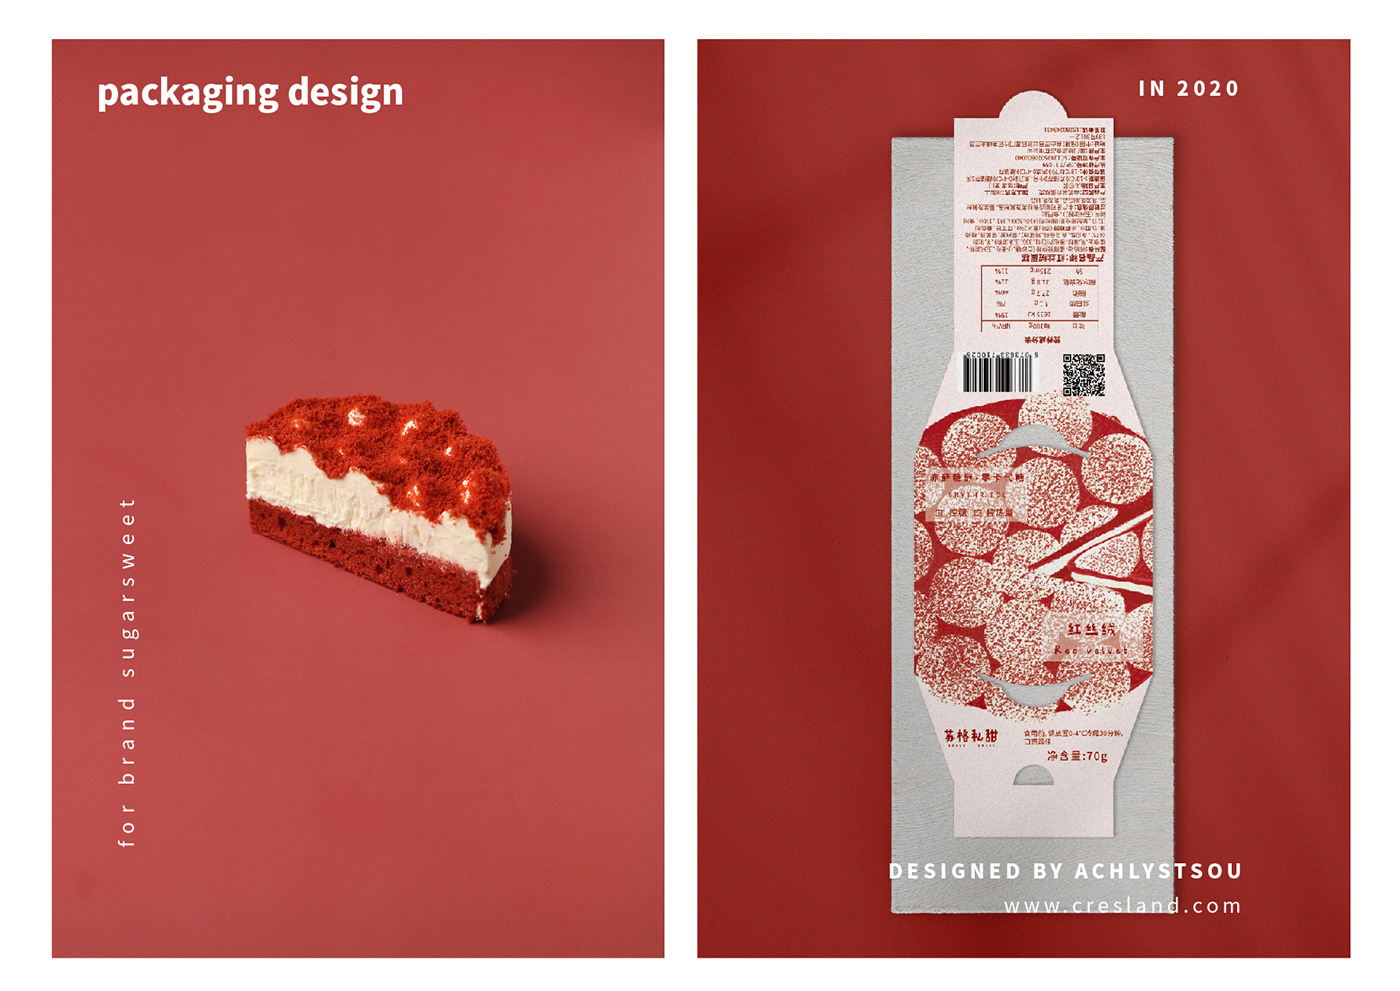 can cake packaging design